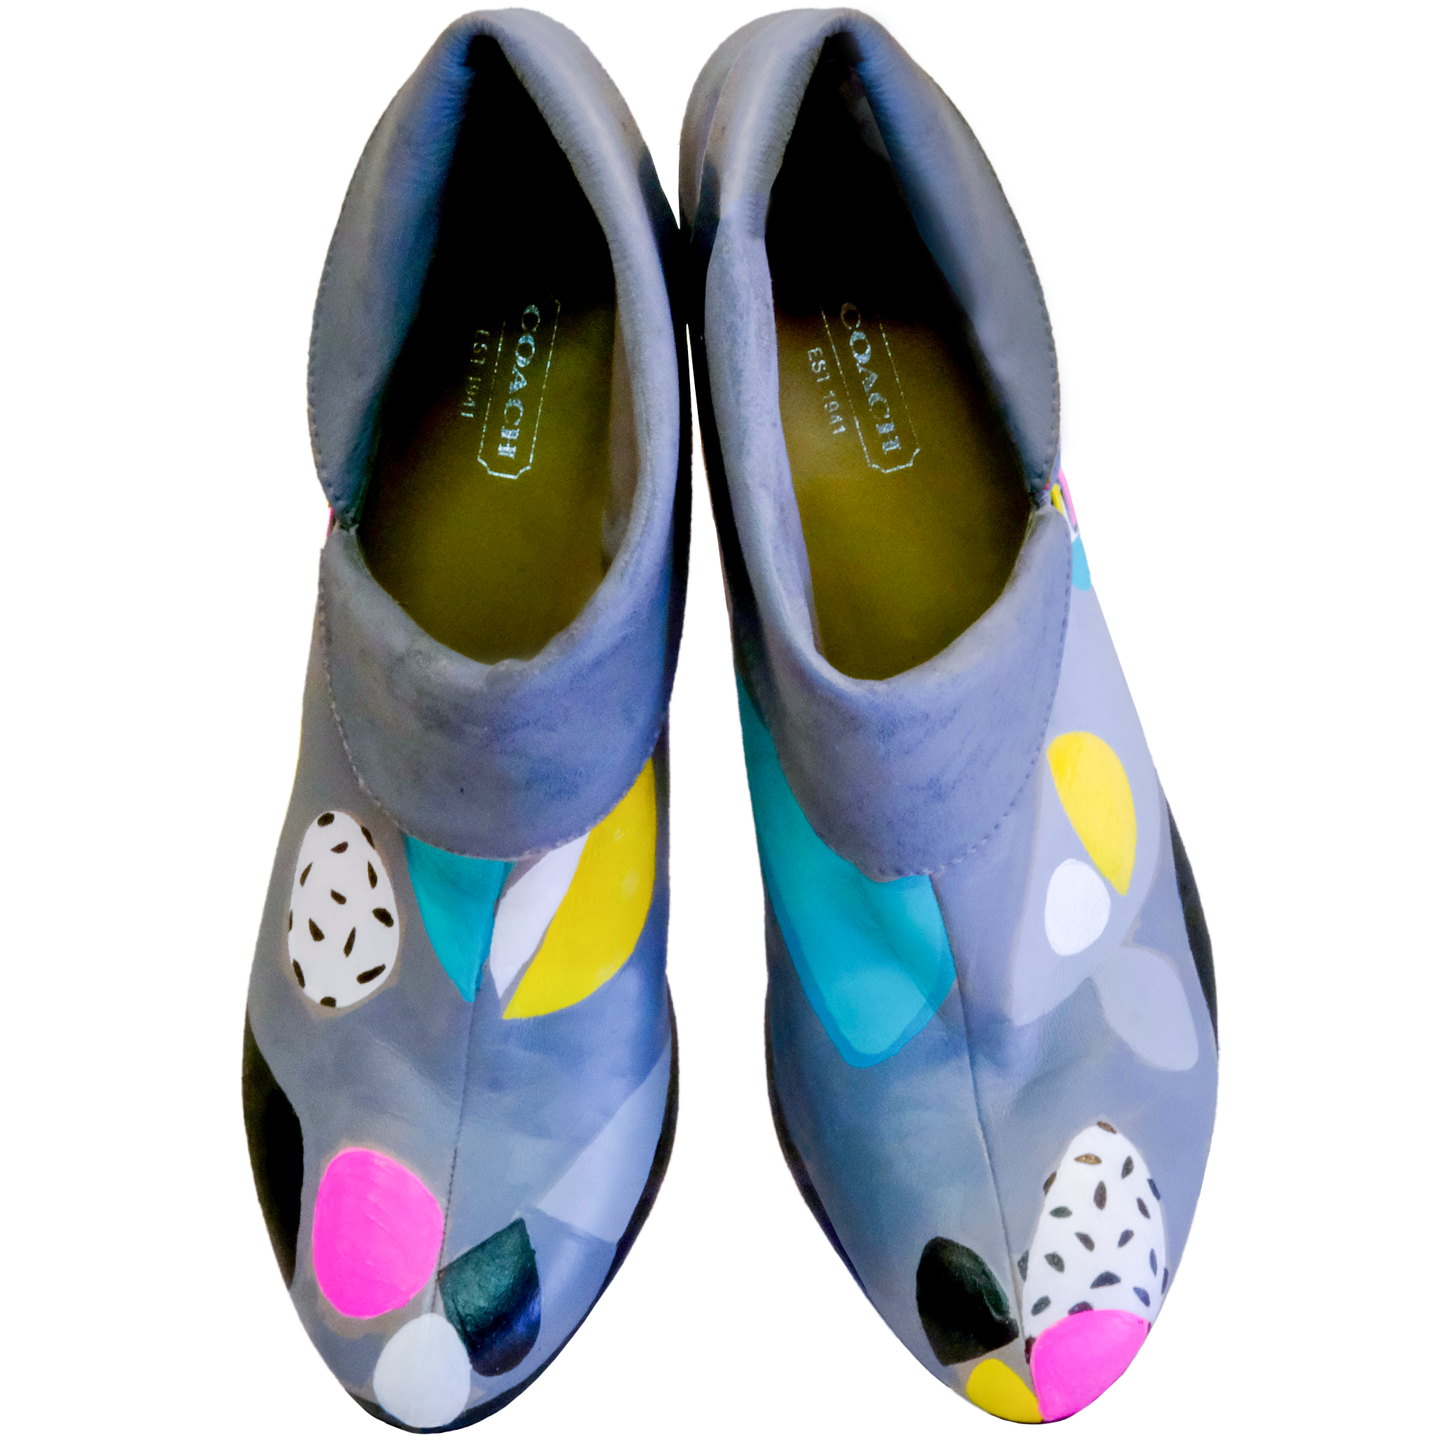 Modern Art Coach Booties - Size 9B - Hand Painted by Matthew Phipps Hines